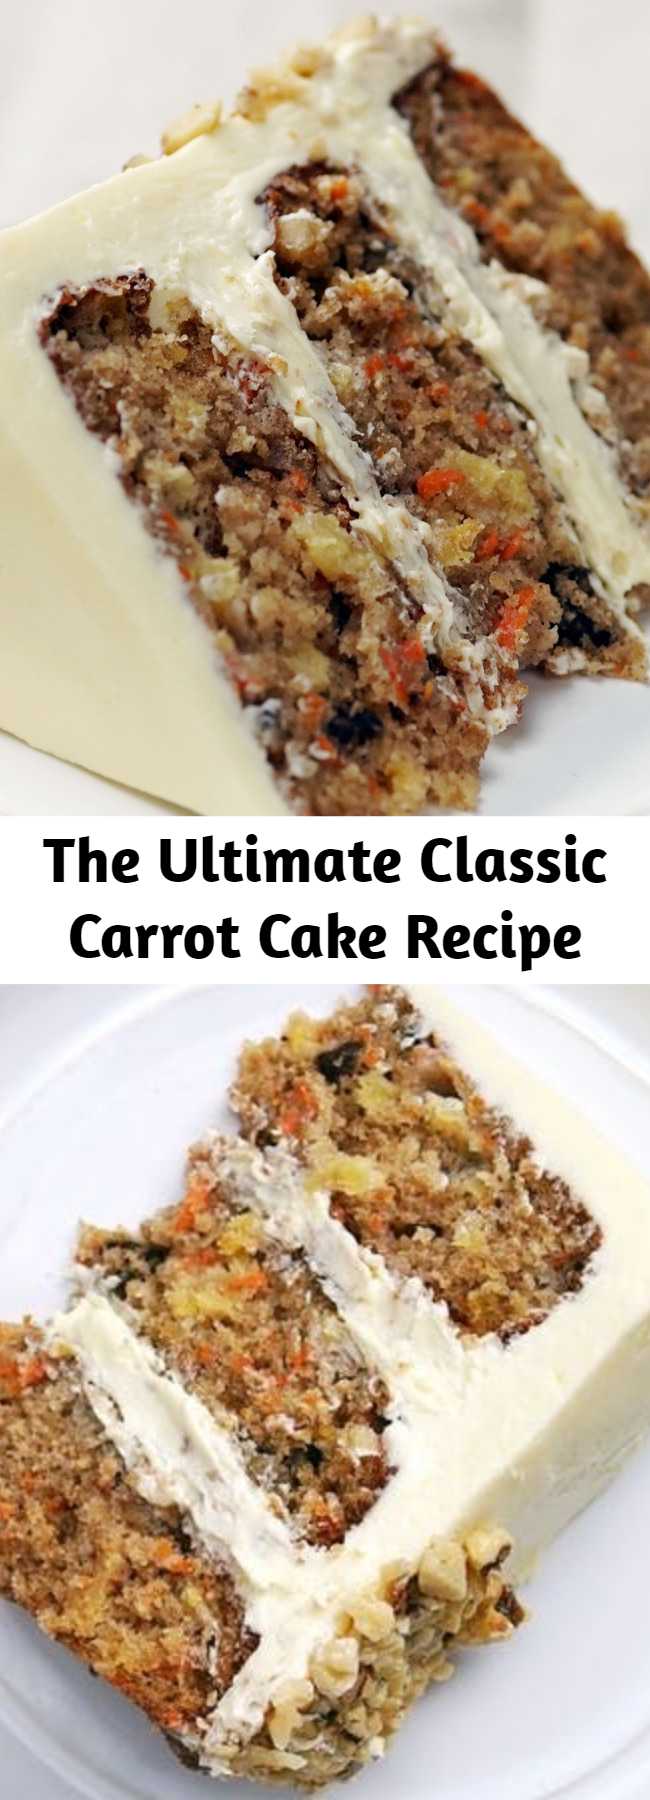 The Ultimate Classic Carrot Cake Recipe - Who would've guessed pineapple, applesauce and carrots could be part of such a satisfyingly sweet dessert?